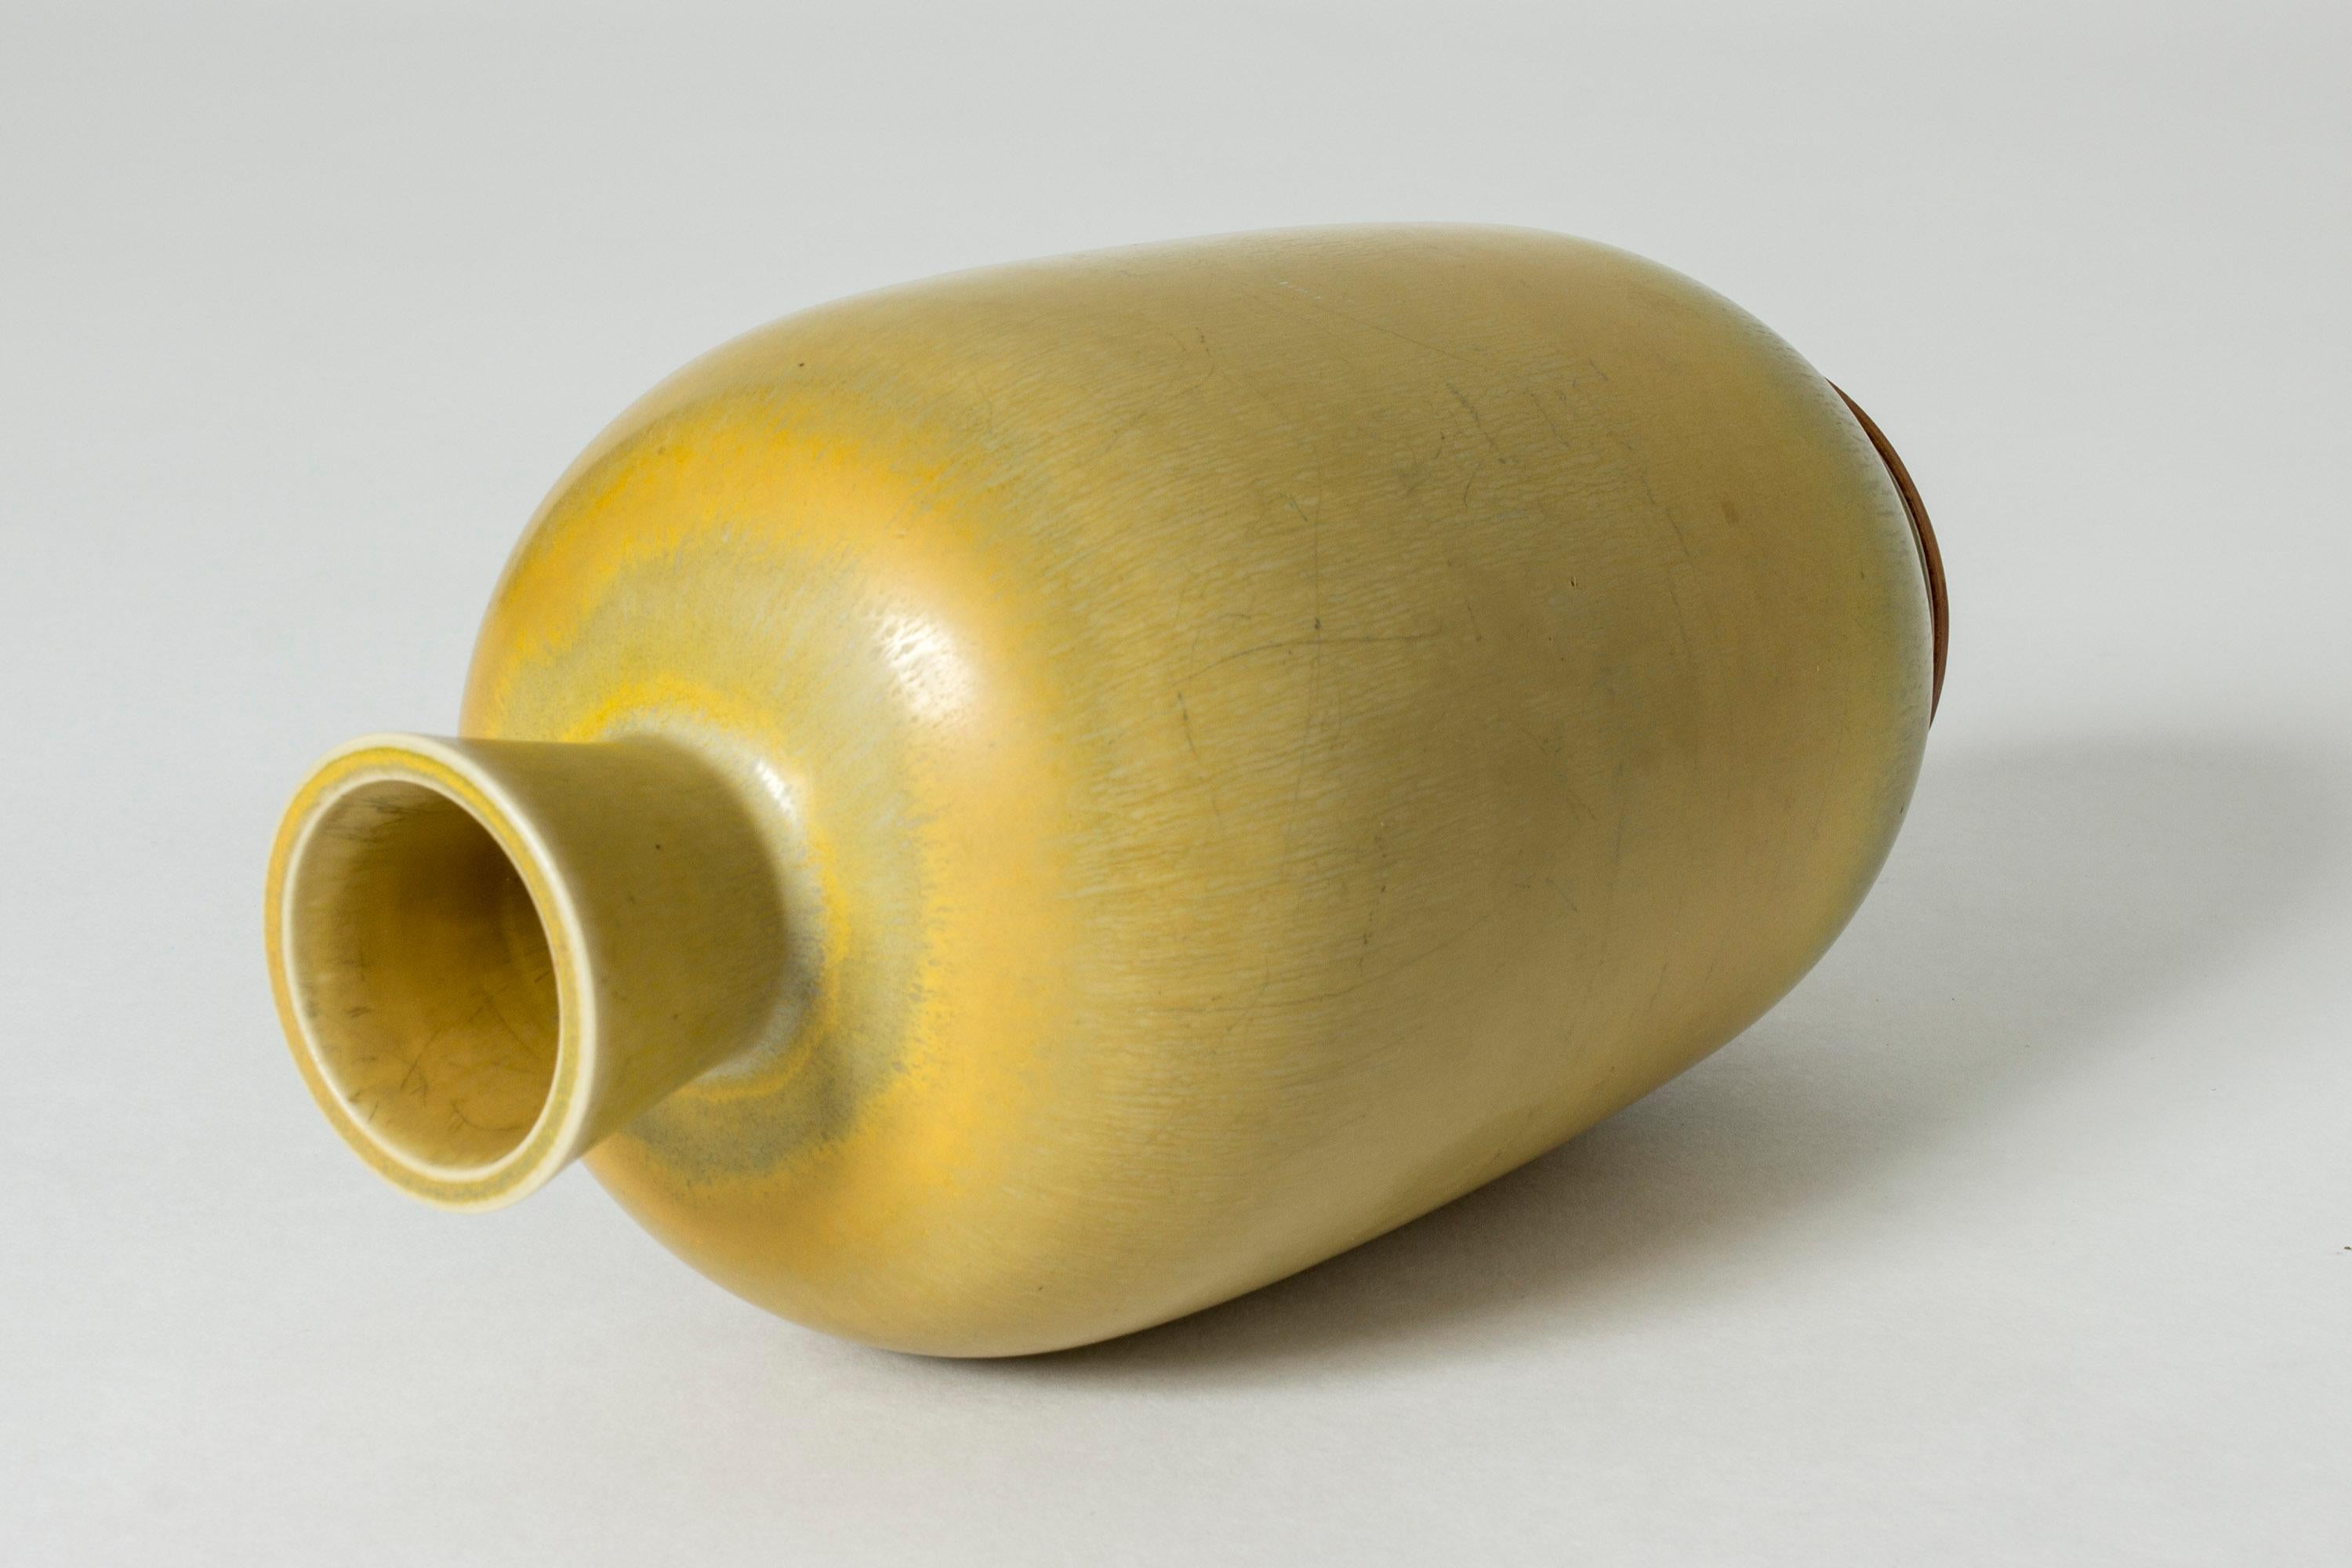 Stoneware vase by Berndt Friberg, in an elegant, tall shape. Saturated yellow hare’s fur glaze with subtle green nuances at the base.